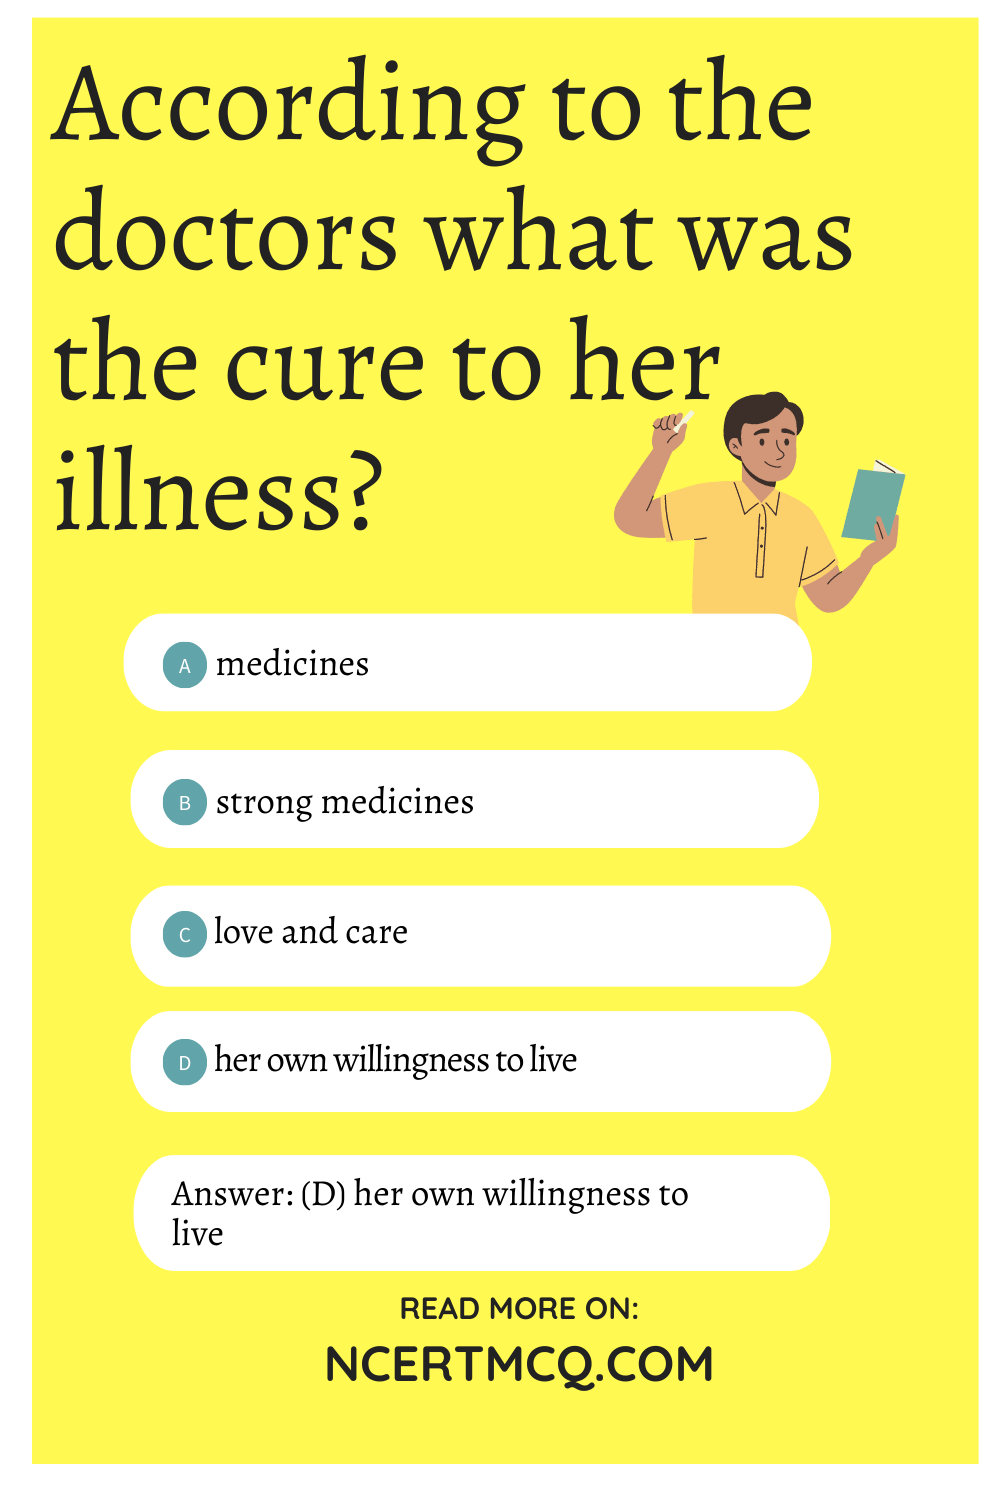 According to the doctors what was the cure to her illness?